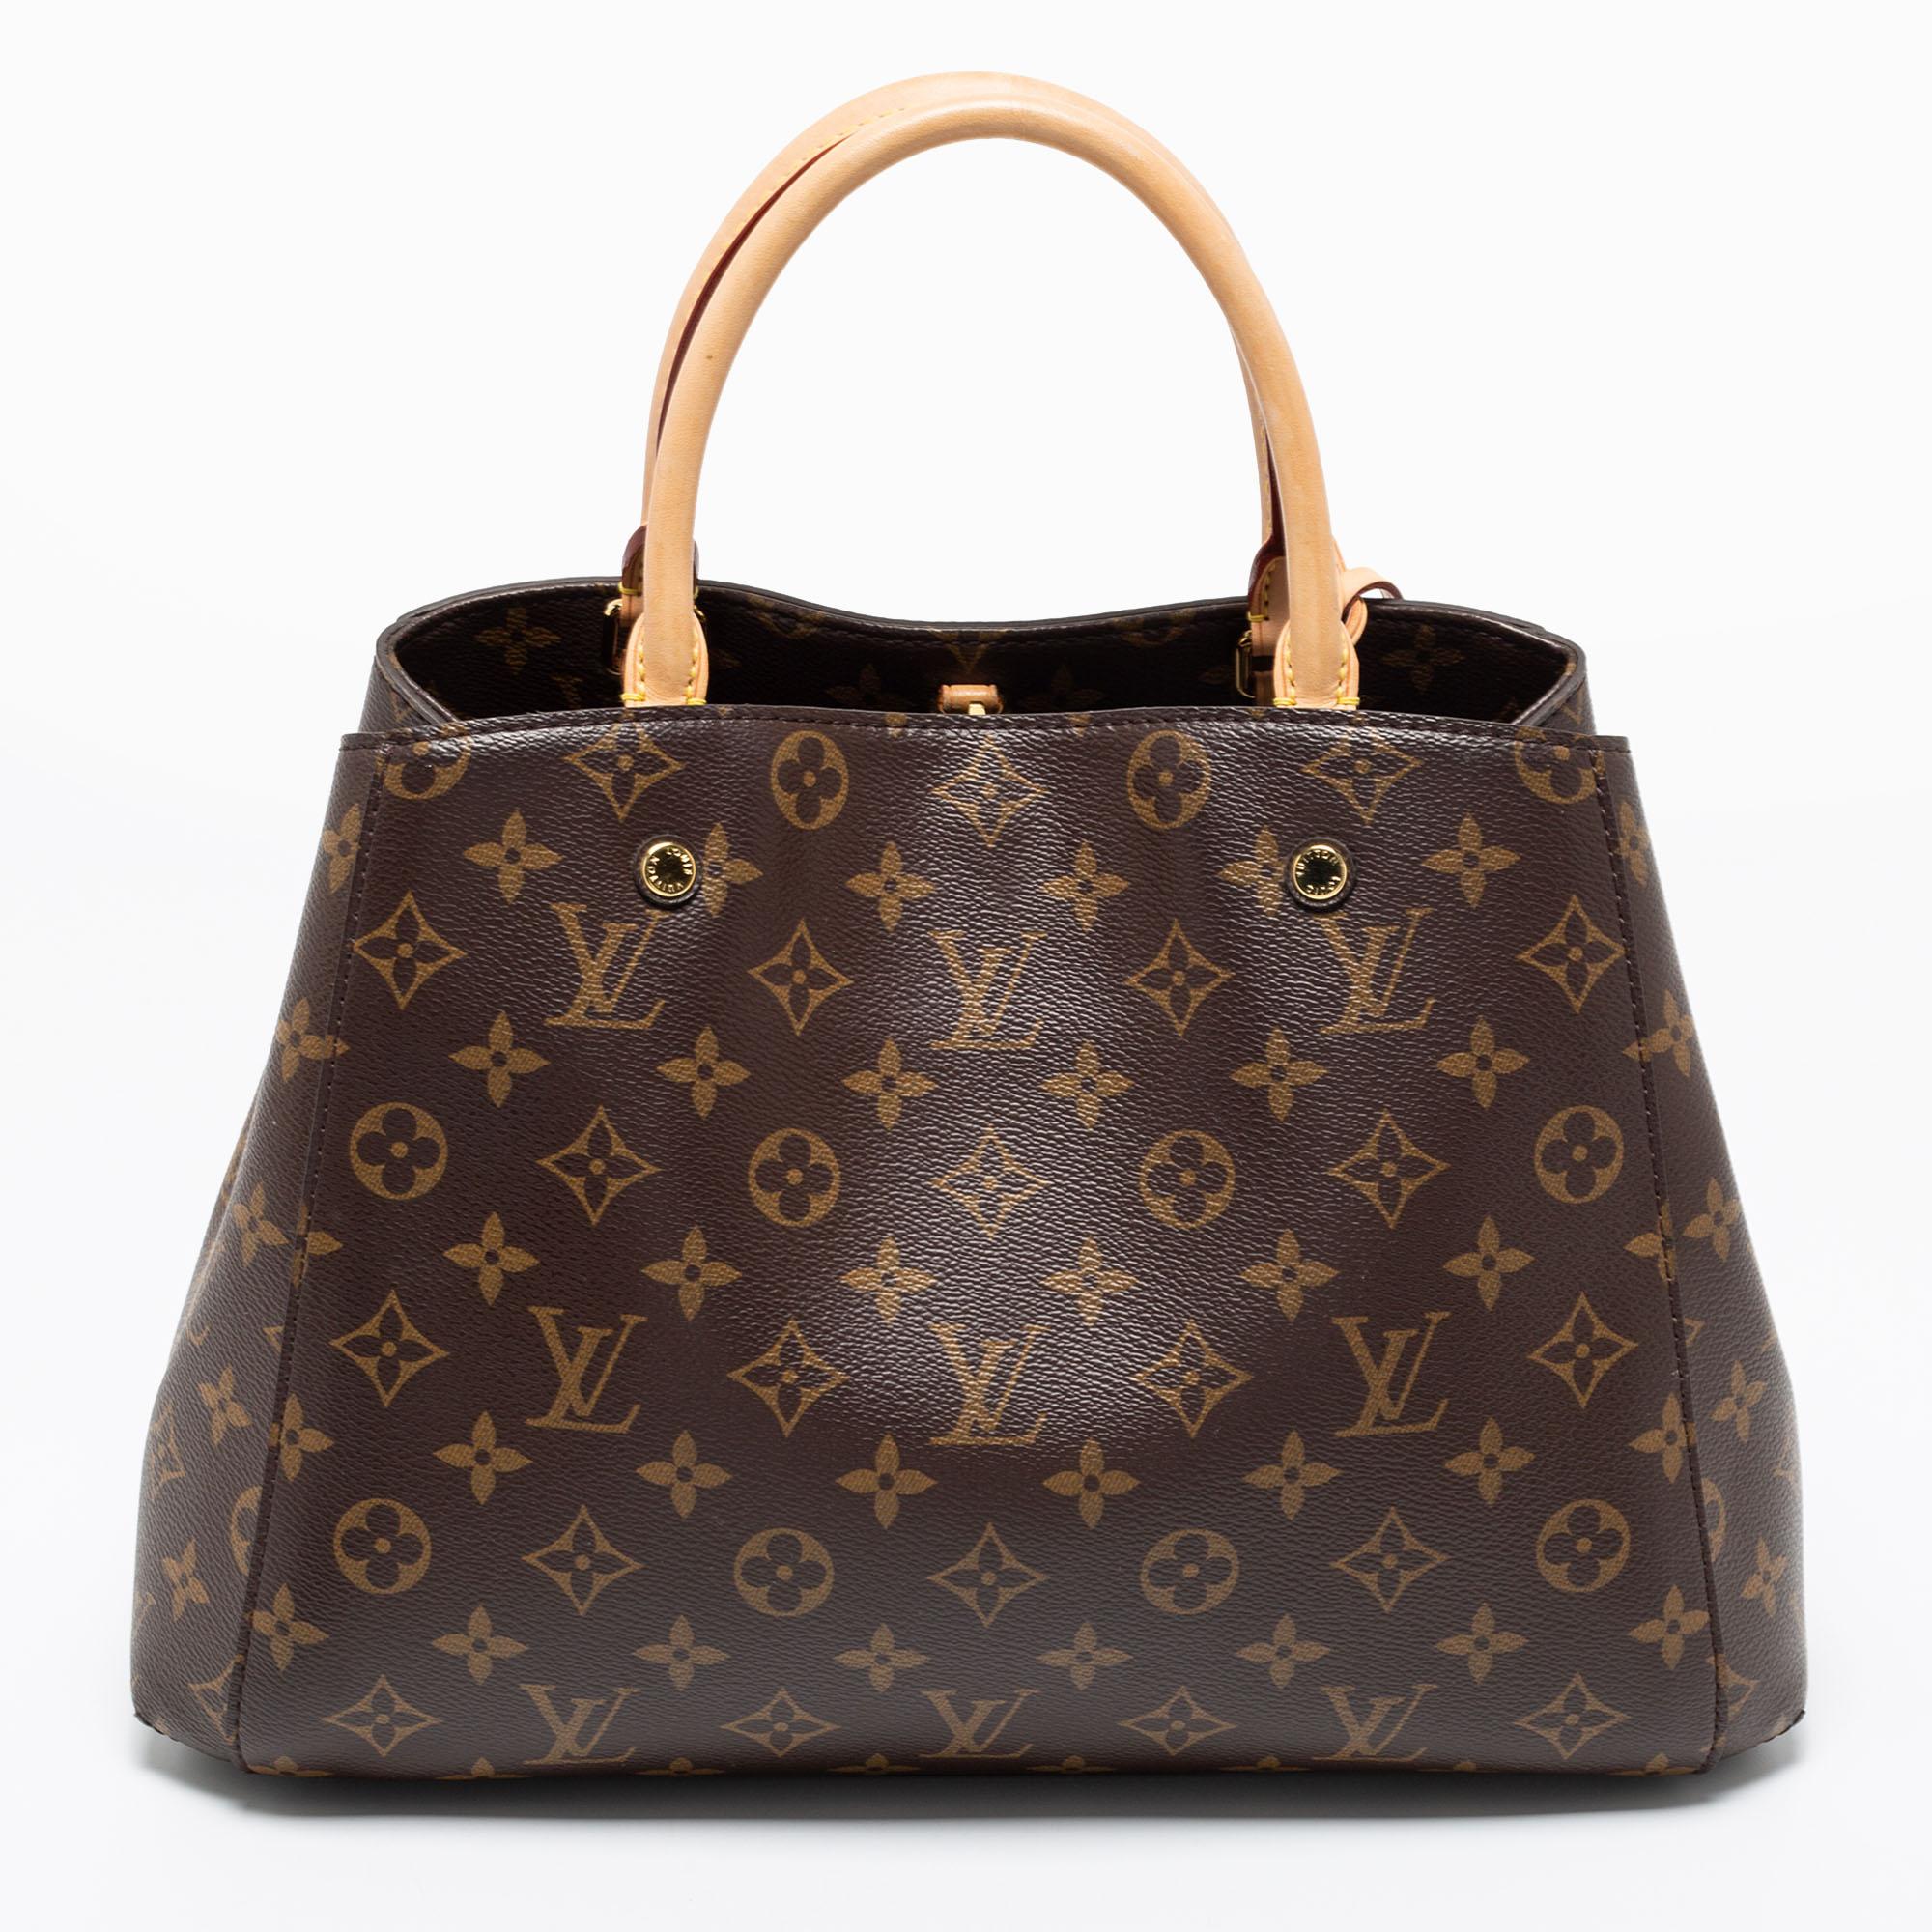 This Montaigne MM bag from Louis Vuitton perfectly balances appeal and function. Crafted from Monogram canvas, it has two rolled handles, a bag strap, gold-tone hardware, and a spacious interior that is divided by a zip compartment.

Includes: